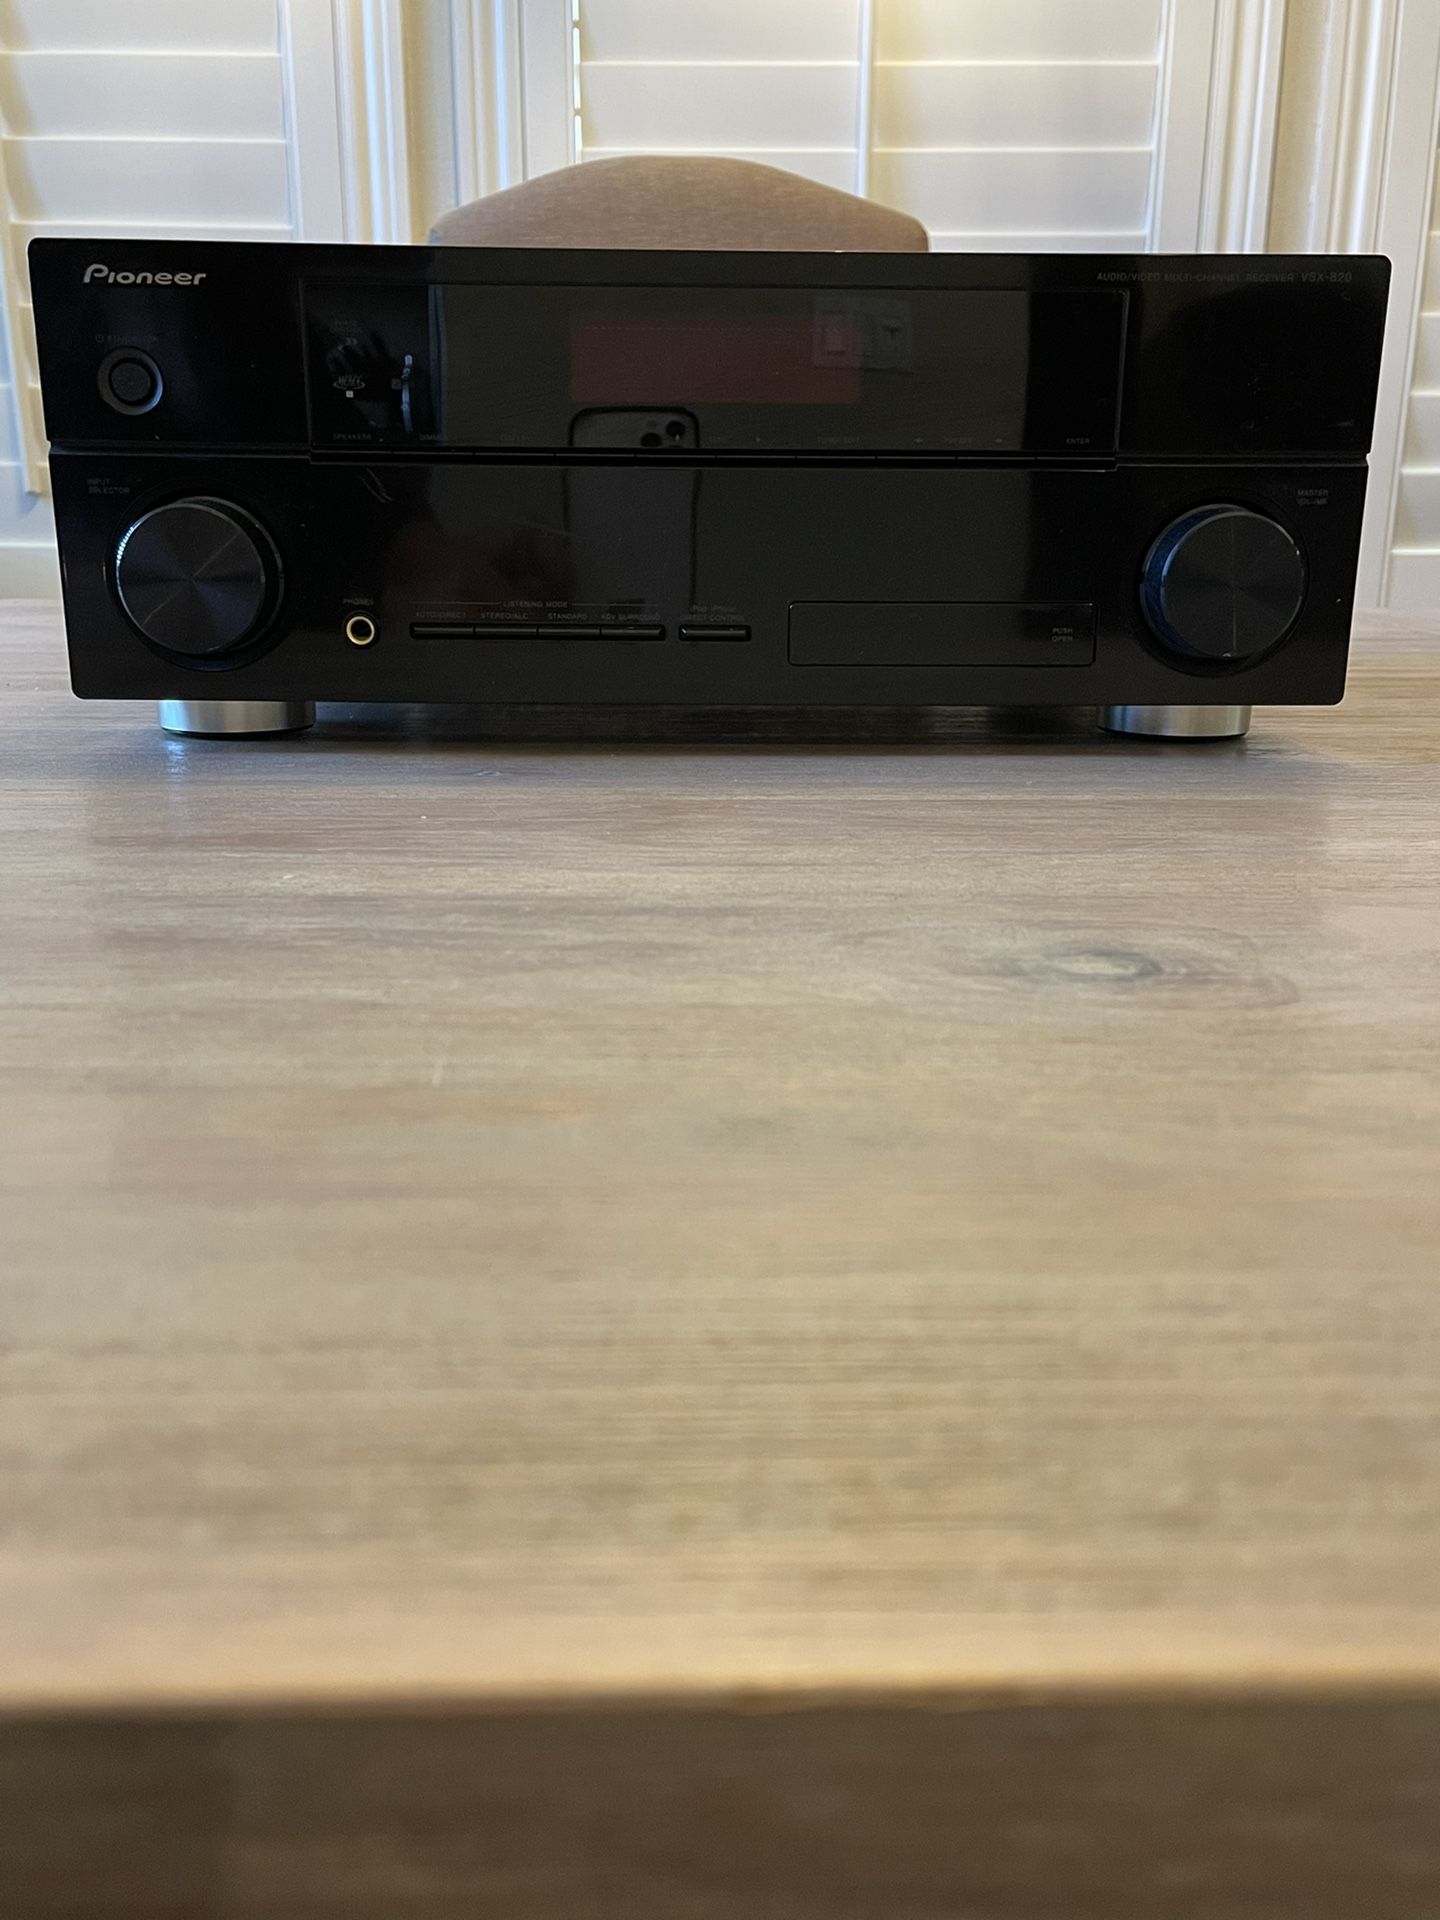 Pioneer/Definitive Technology Home Theater $250